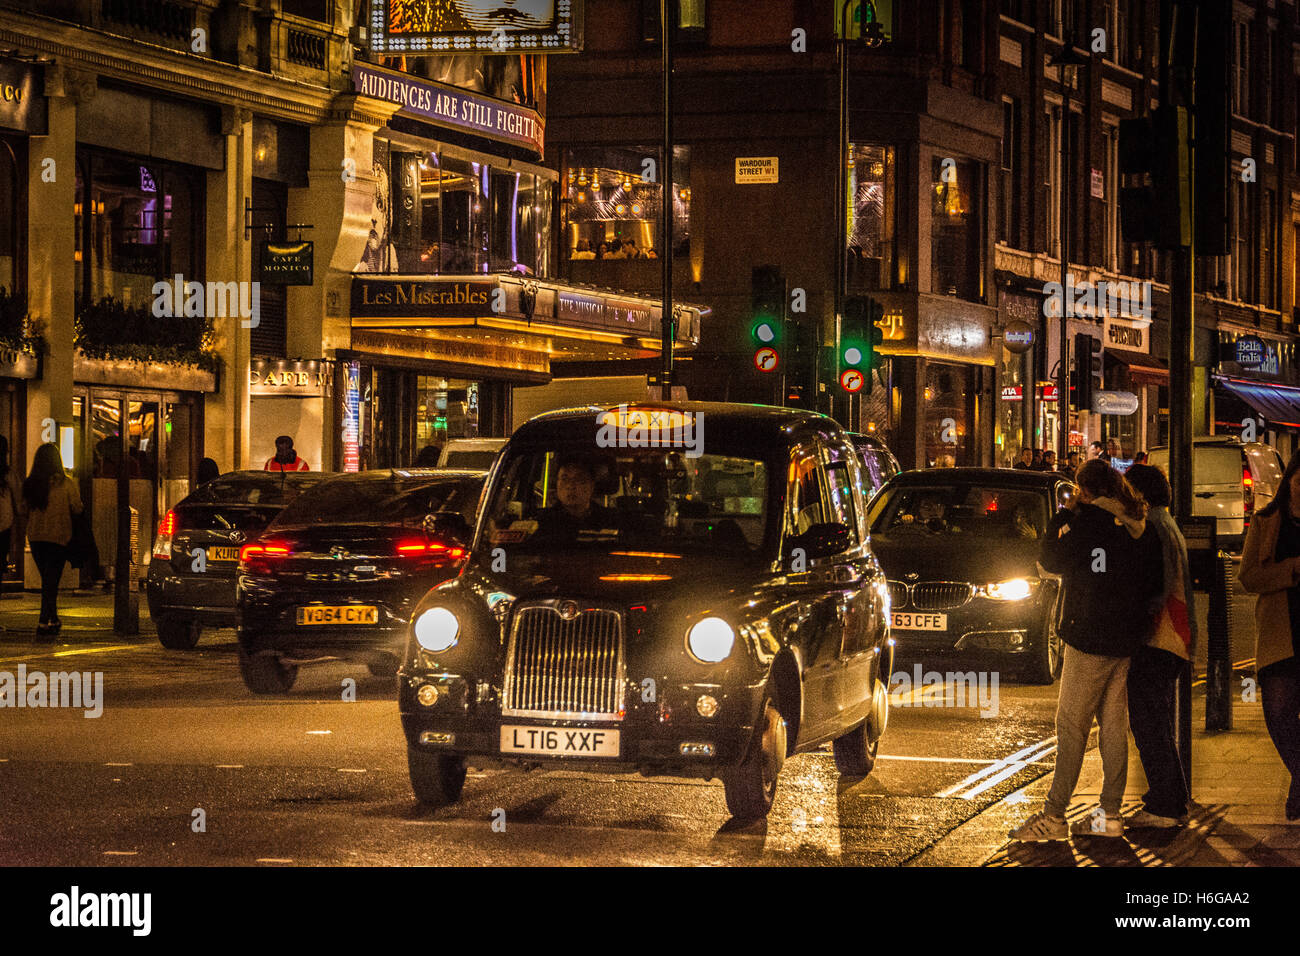 Black taxicab for-hire sign on Shaftesbury Avenue in Chinatown, Soho, Central London, UK Stock Photo